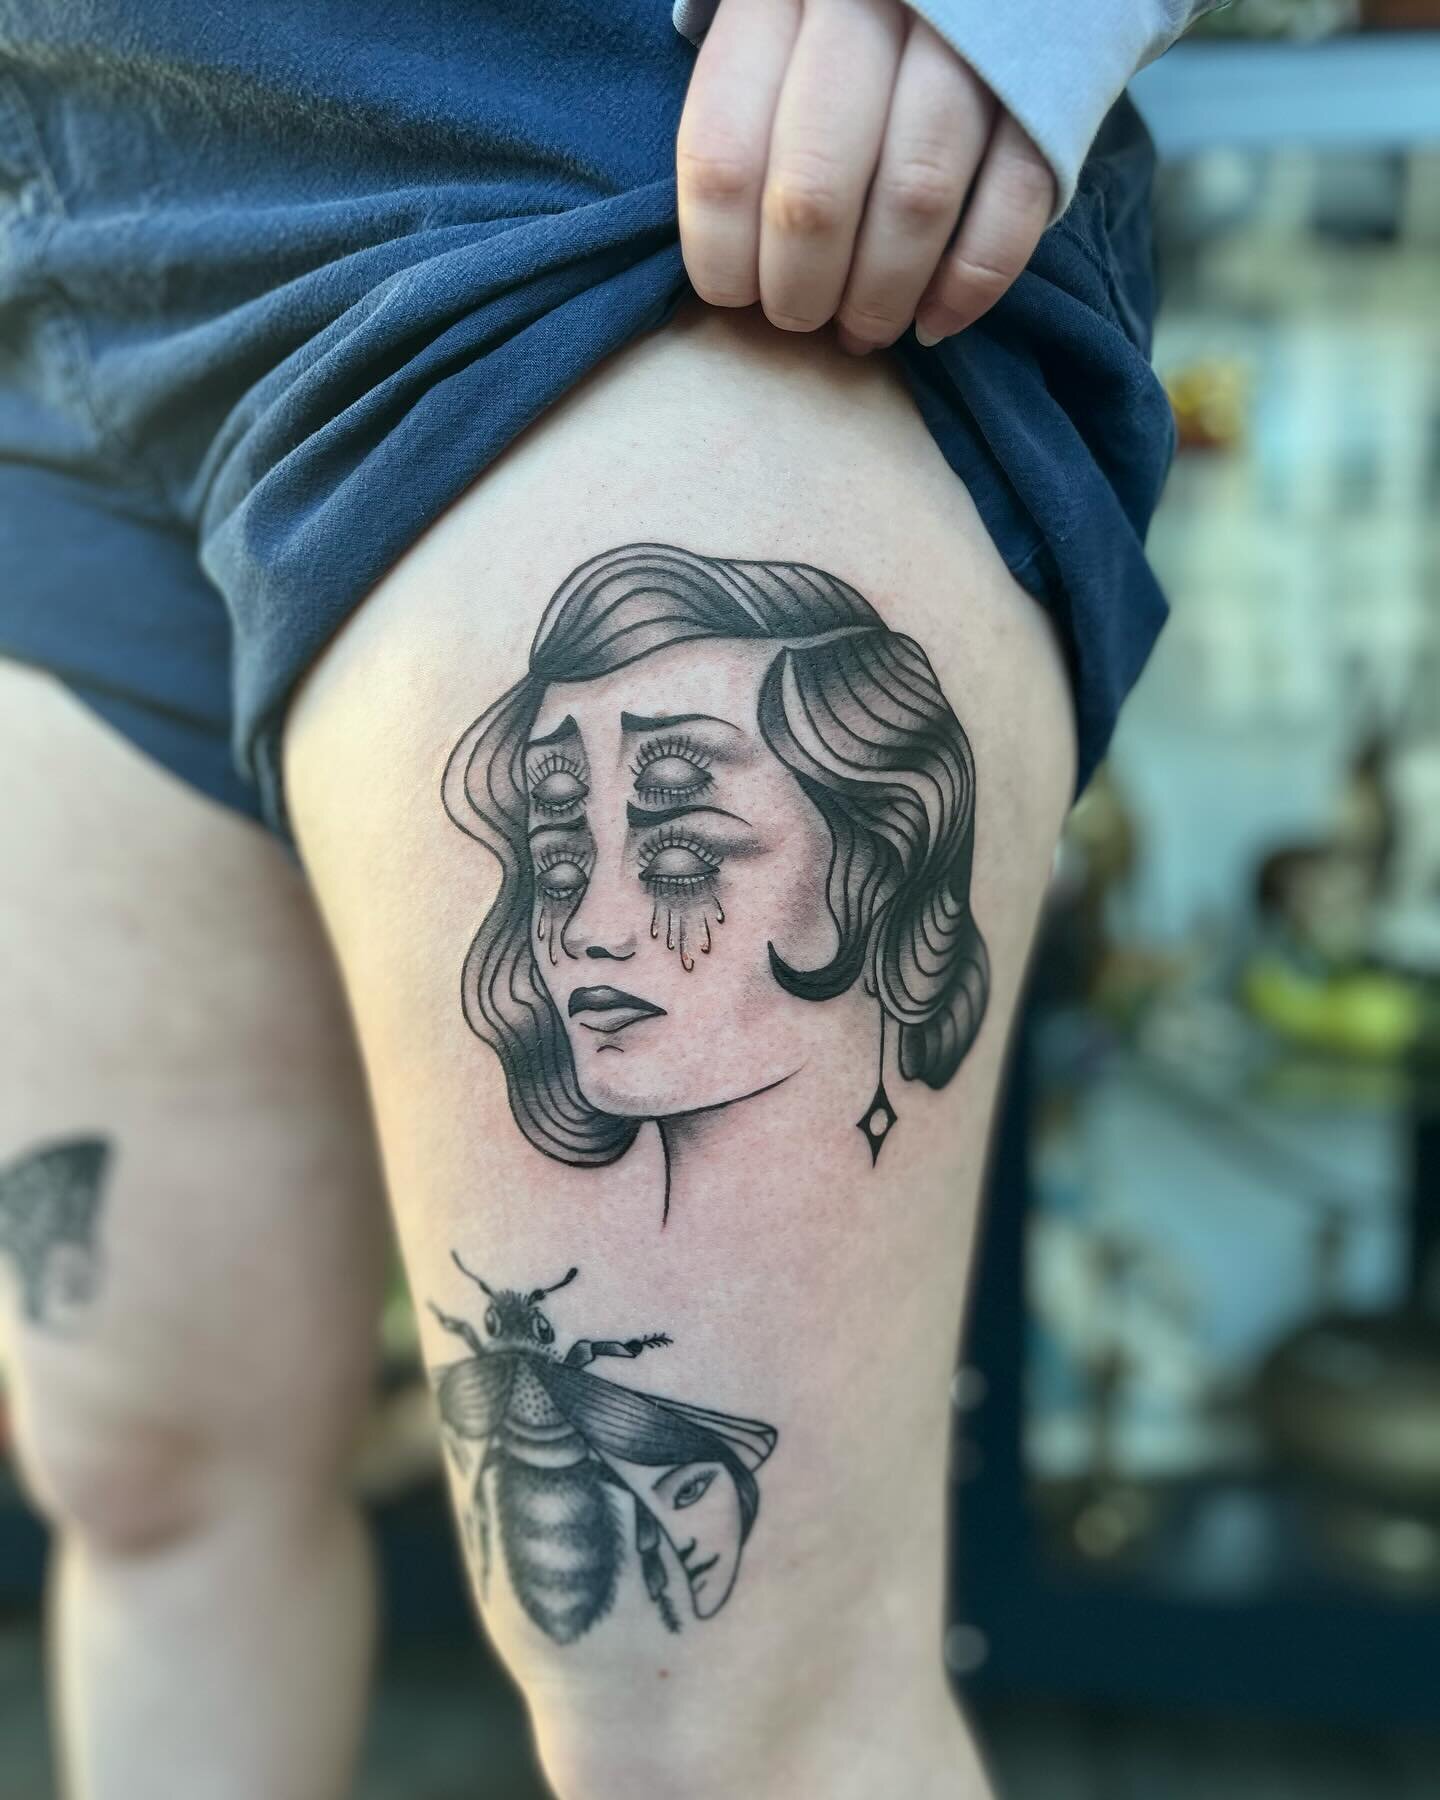 Sweet spooky gal for Ella &amp; some healed pieces from the past few months. Done @saidanddonetattoo 
.
.
.
.
.
.
.
.
.
.
.
#tattooapprentice #apprenticetattoo #tattoo #ladyhead #healedtattoo #jamaicaplain